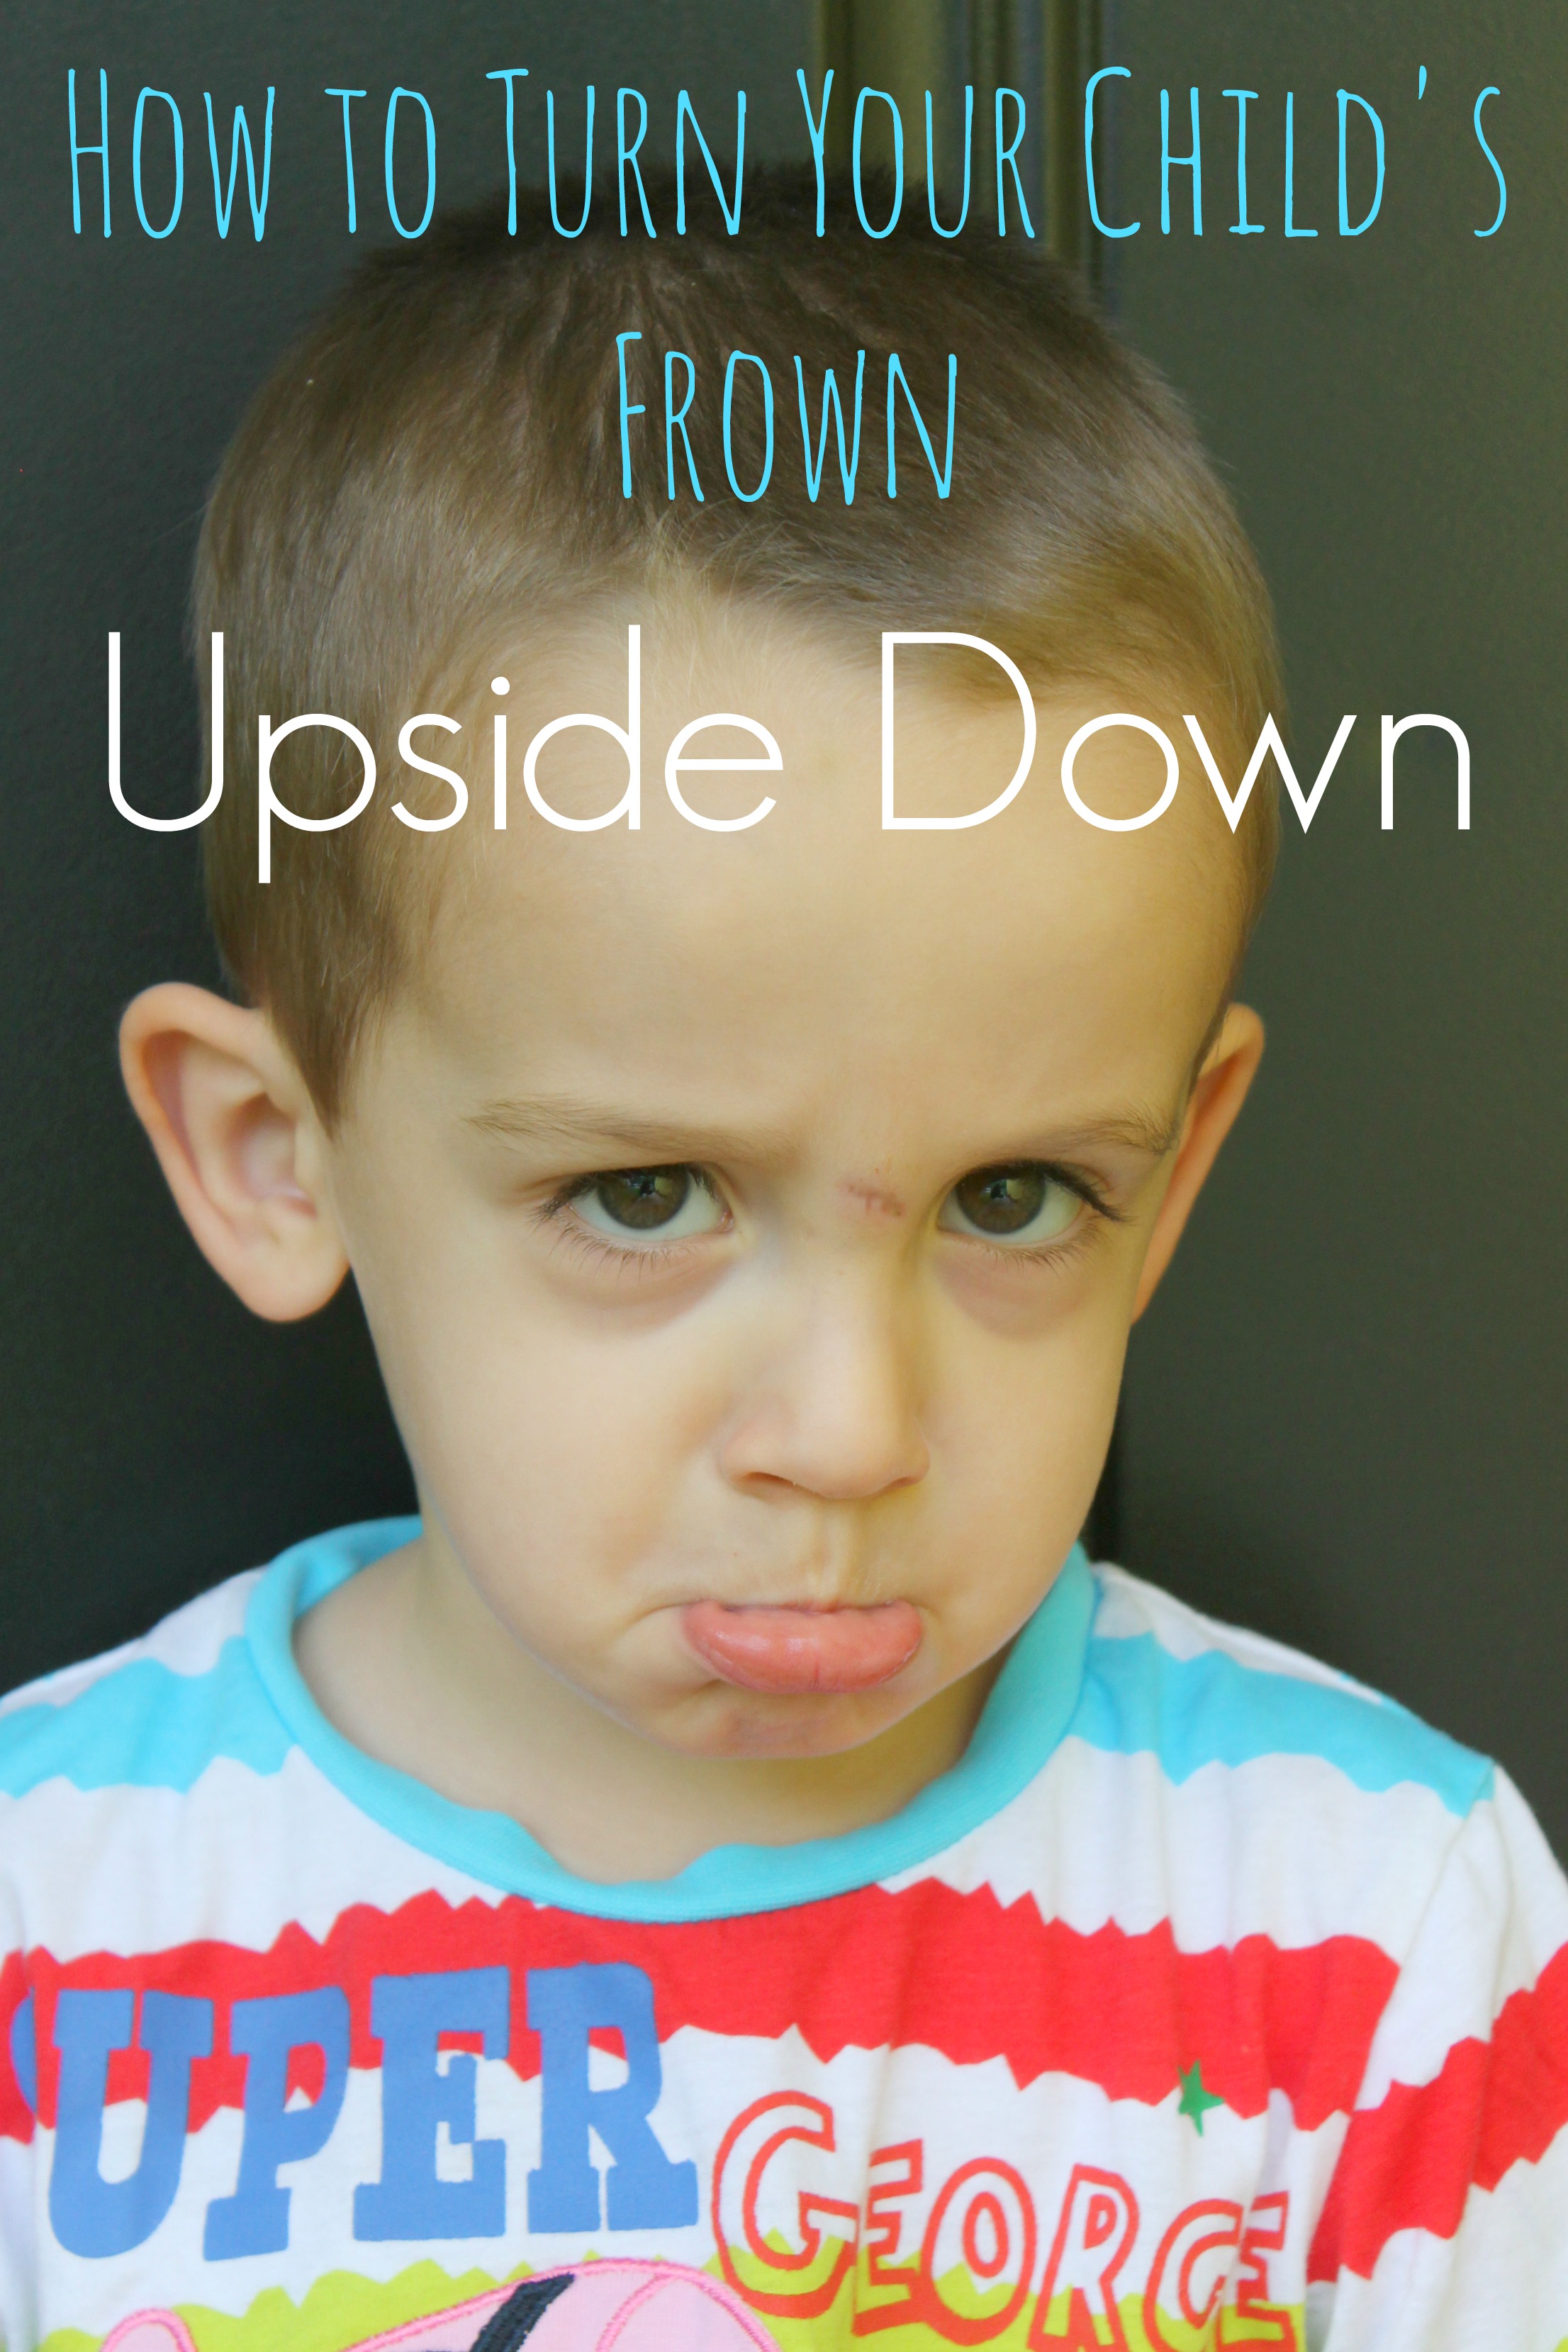 How to Turn Your Child's Frown Upside Down - Happy Home Fairy